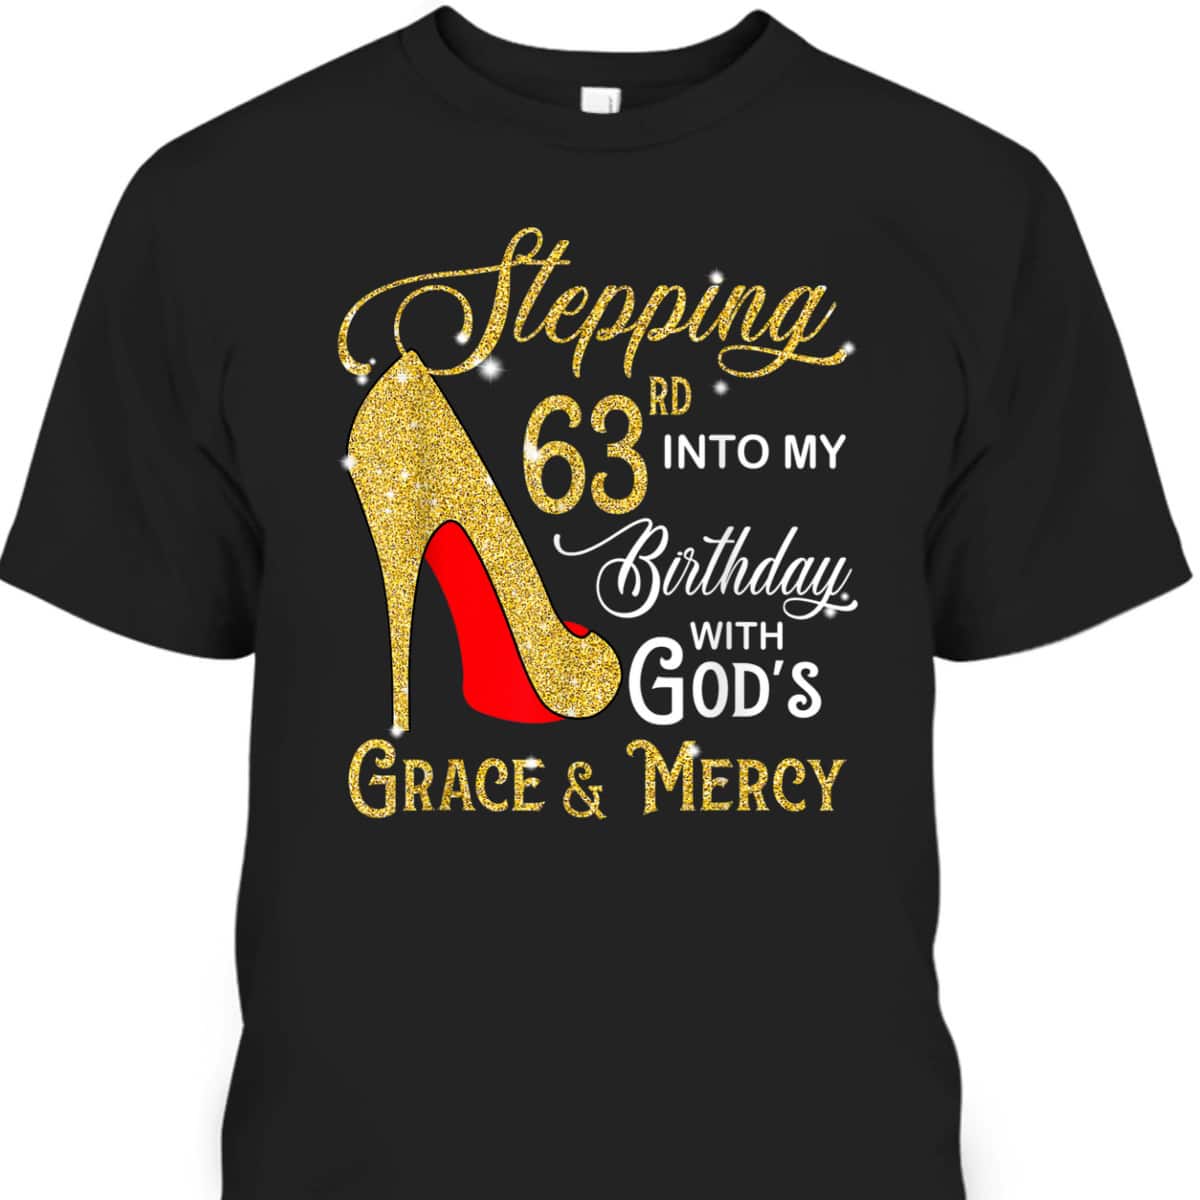 Stepping Into My 63rd Birthday With God's Grace And Mercy T-Shirt